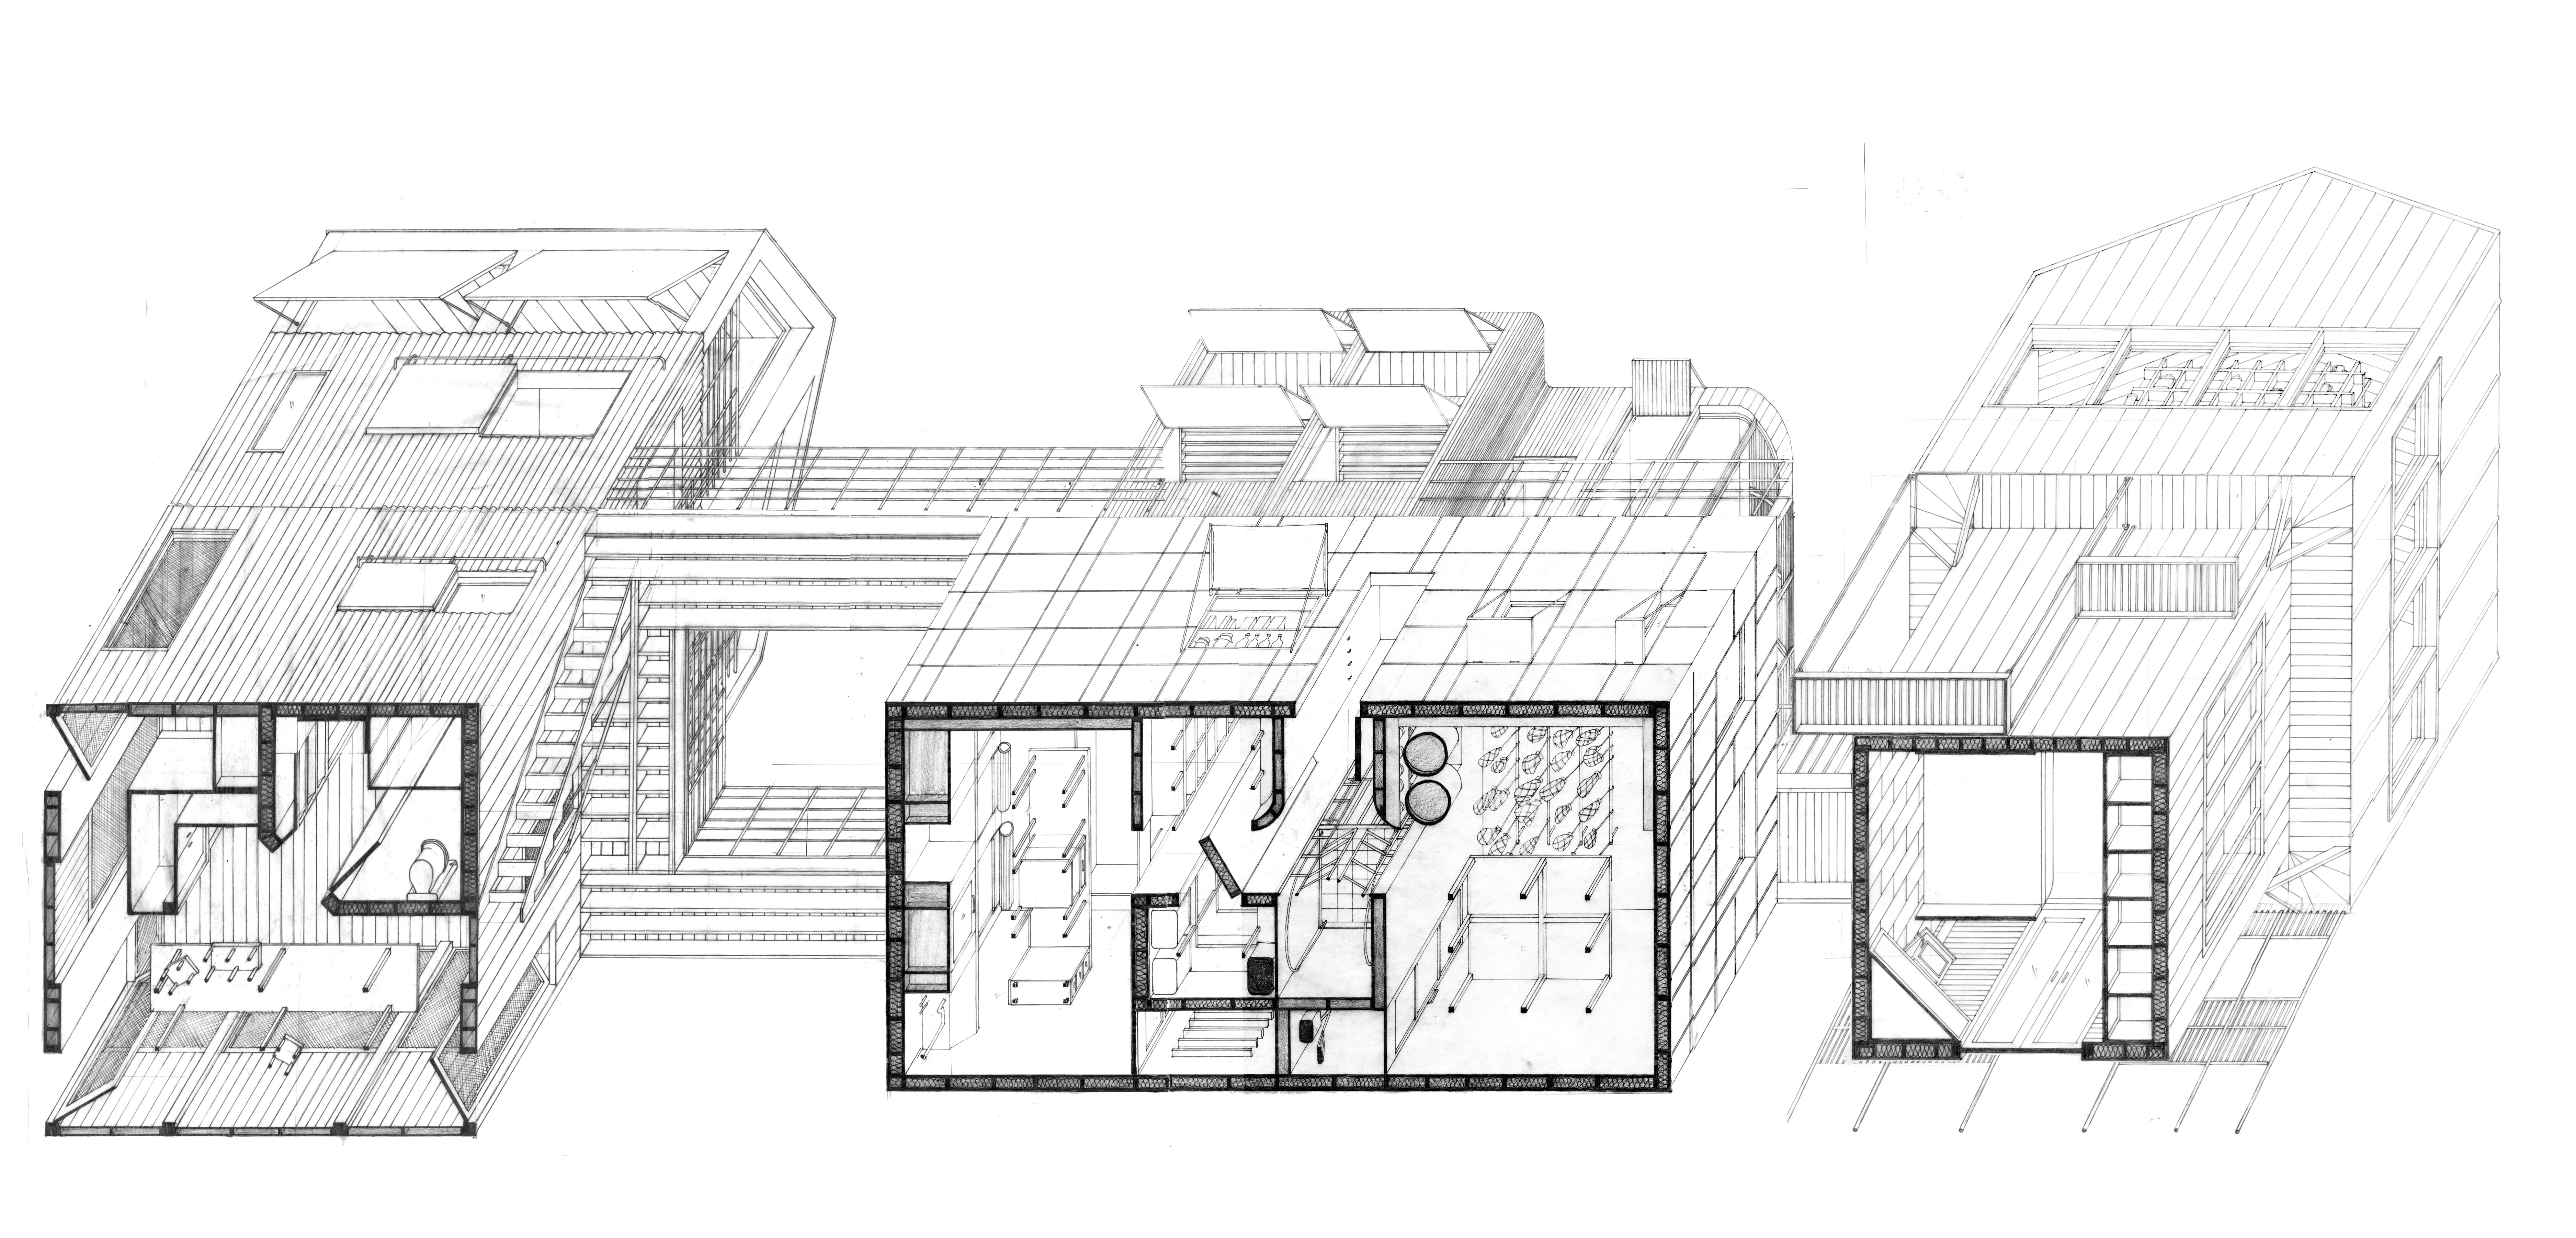 Large black and white pencil drawing of a complex of 2 storey spaces connected by elevated walkways. Drawn in a worm’s eye axonometric looking up.